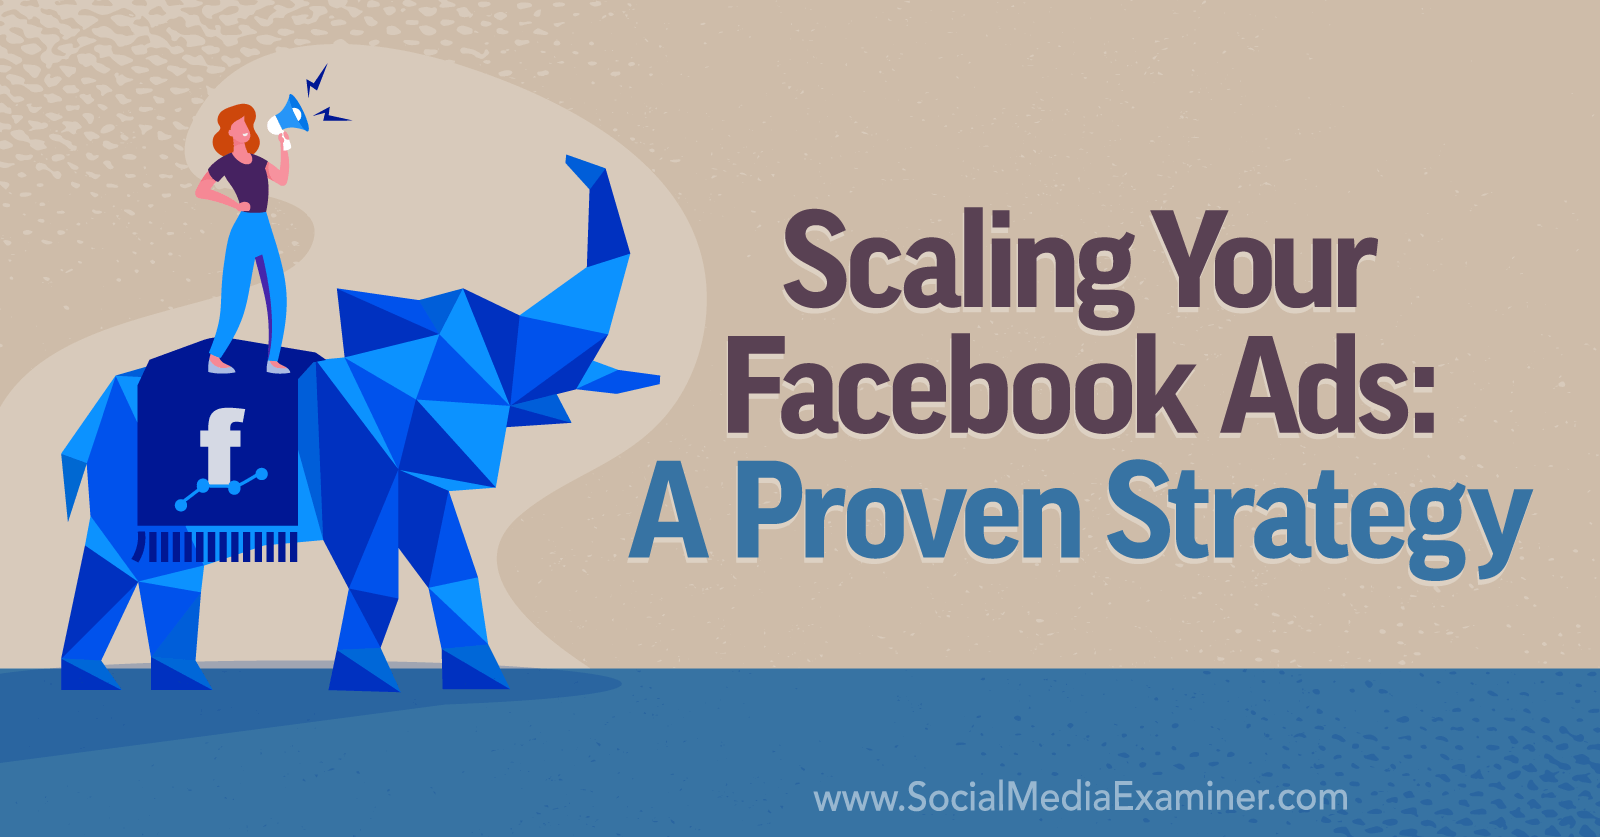 Scaling Your Facebook Ads: A Proven Strategy by Social Media Examiner